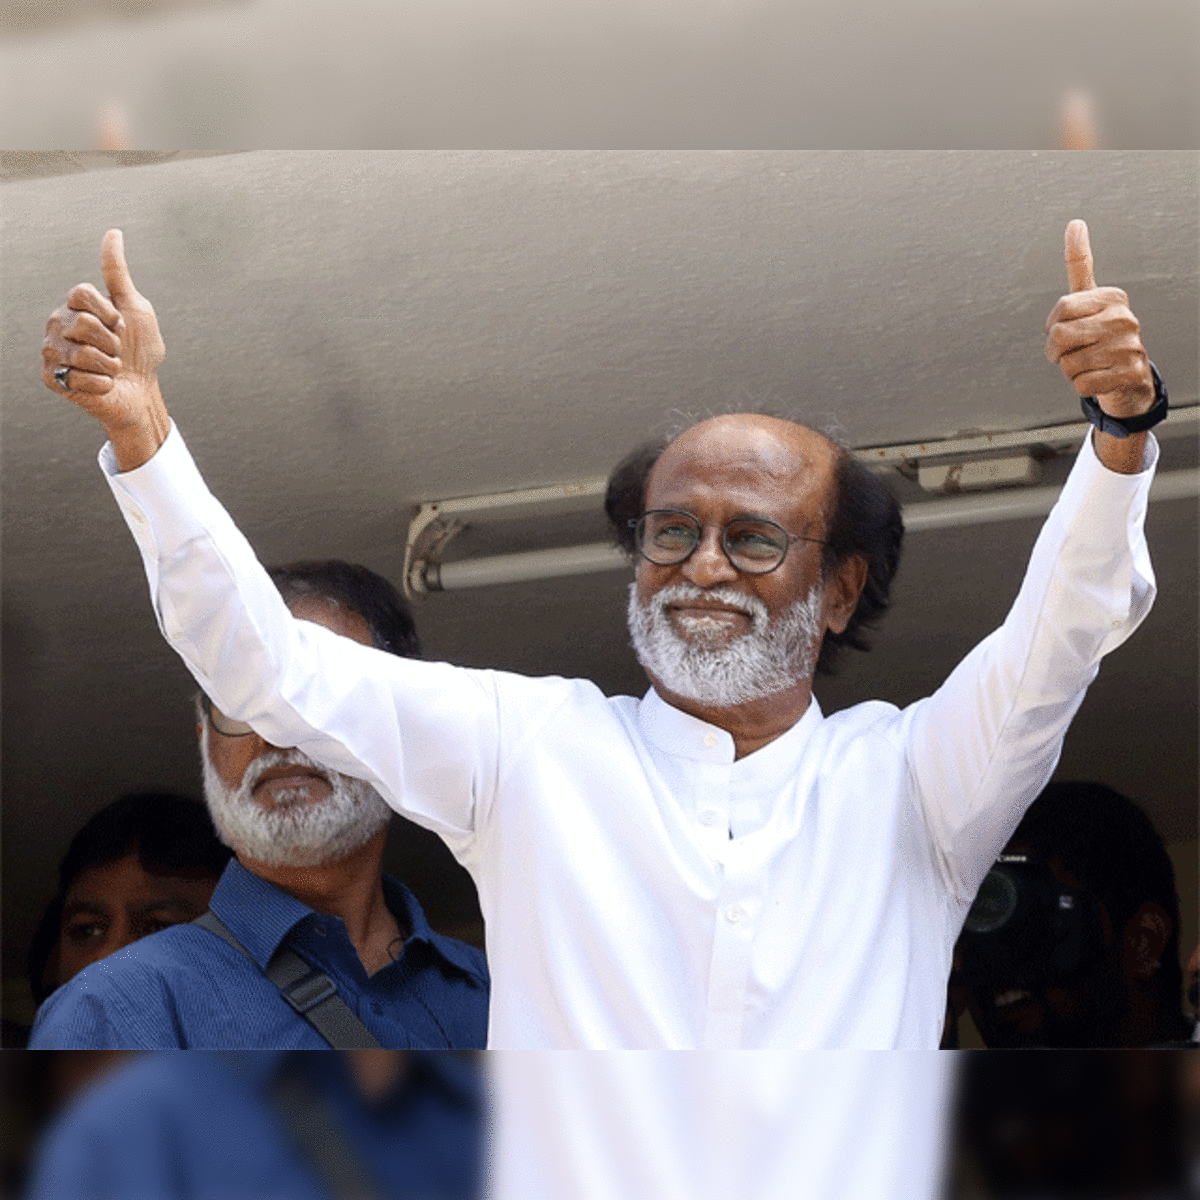 Game I love the most': Superstar Rajinikanth shows off his chess moves at  Olympiad in Tamil Nadu